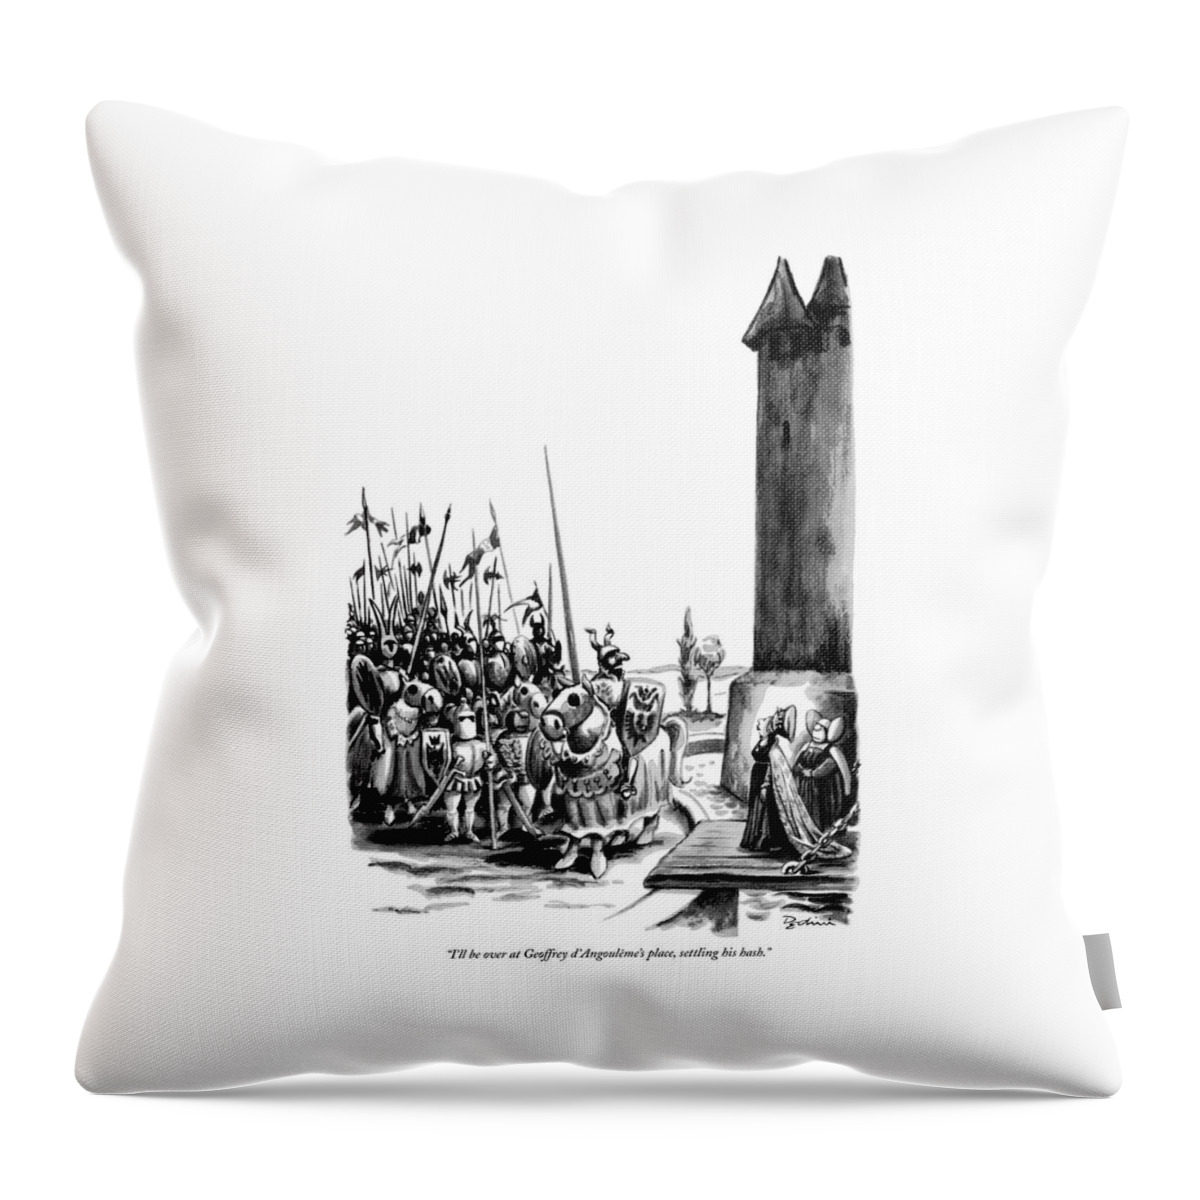 I'll Be Over At Geoffrey D'angouleme's Place Throw Pillow